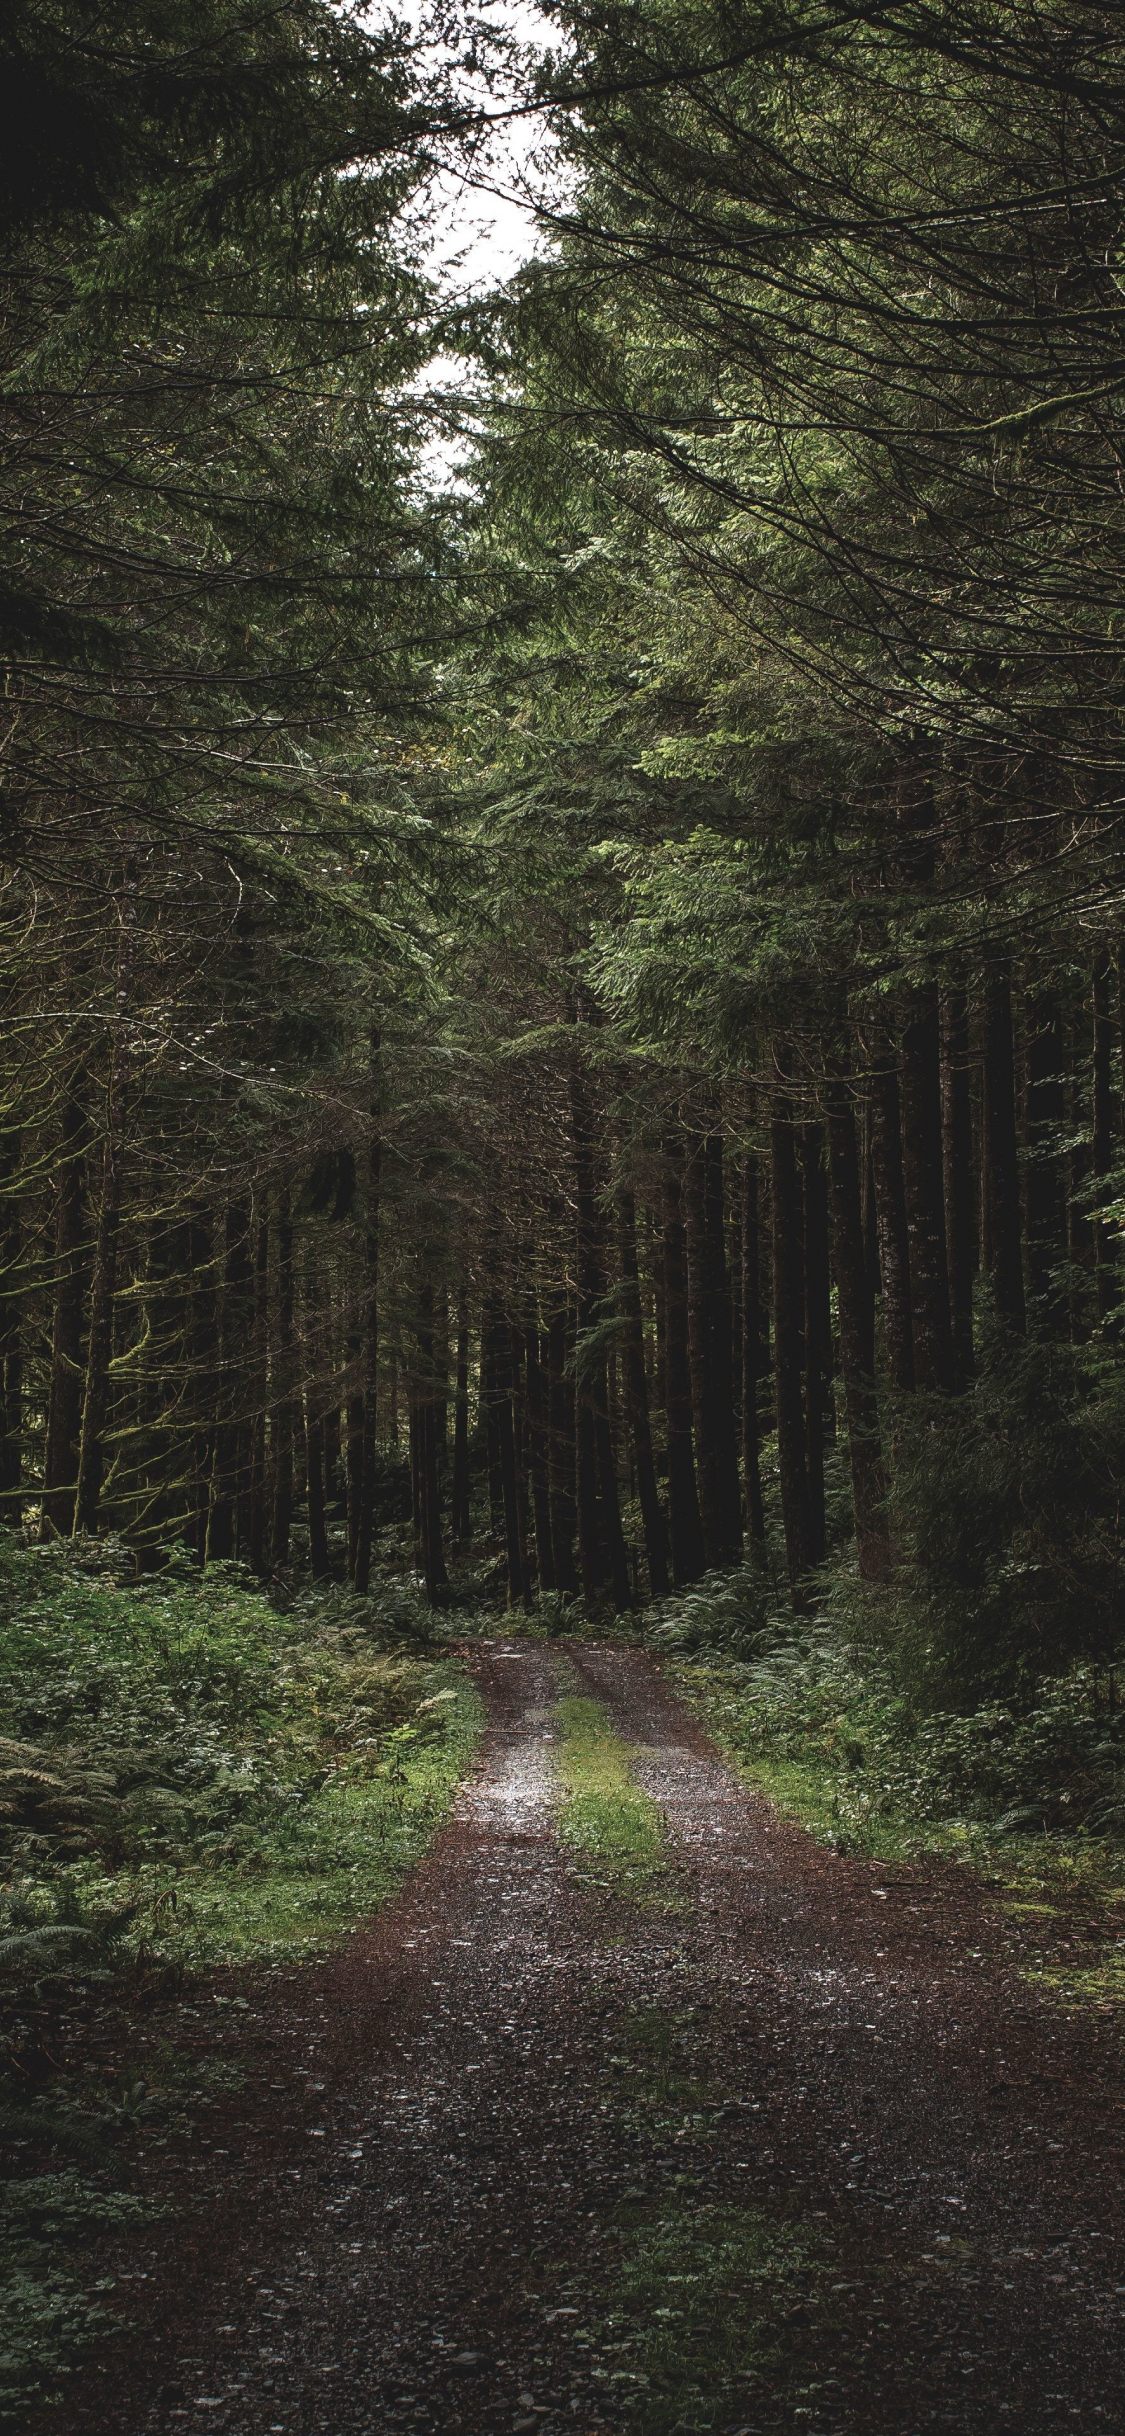 Dirt road, path, trees, forest, greenery, 1125x2436 wallpaper